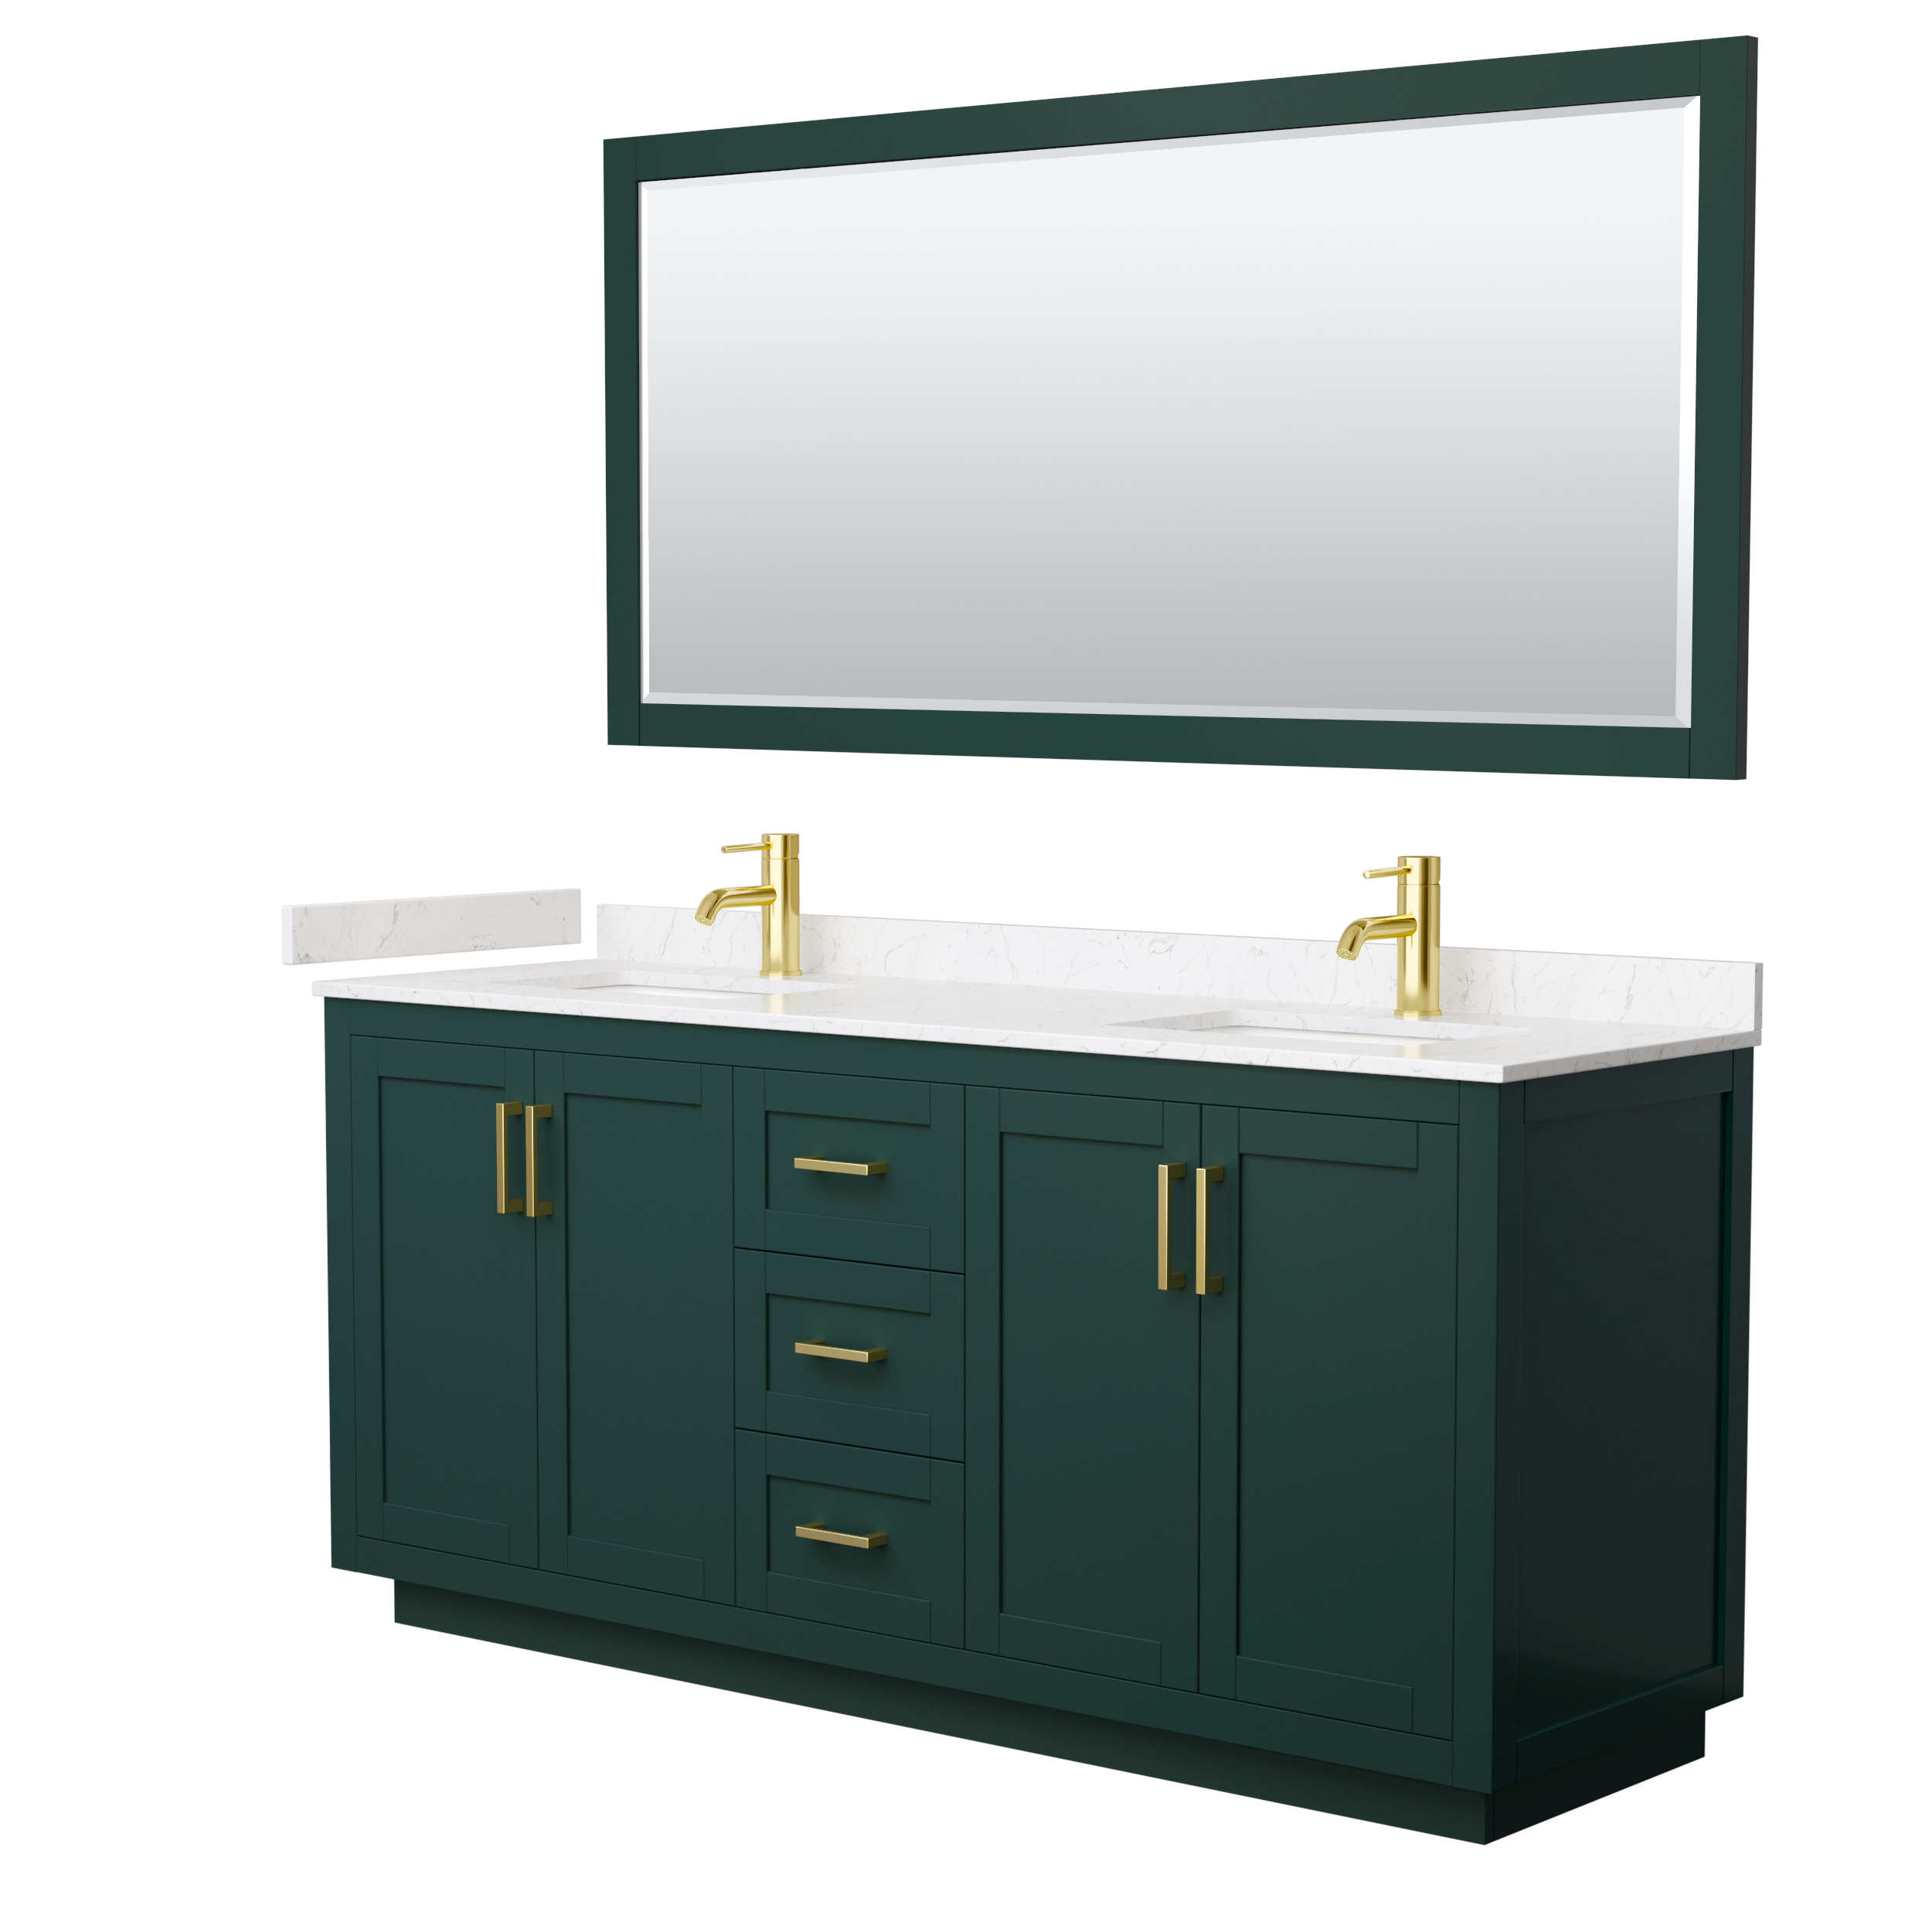 Miranda 72" Double Vanity with Cultured Marble Counter - Green WC-2929-72-DBL-VAN-GRN-